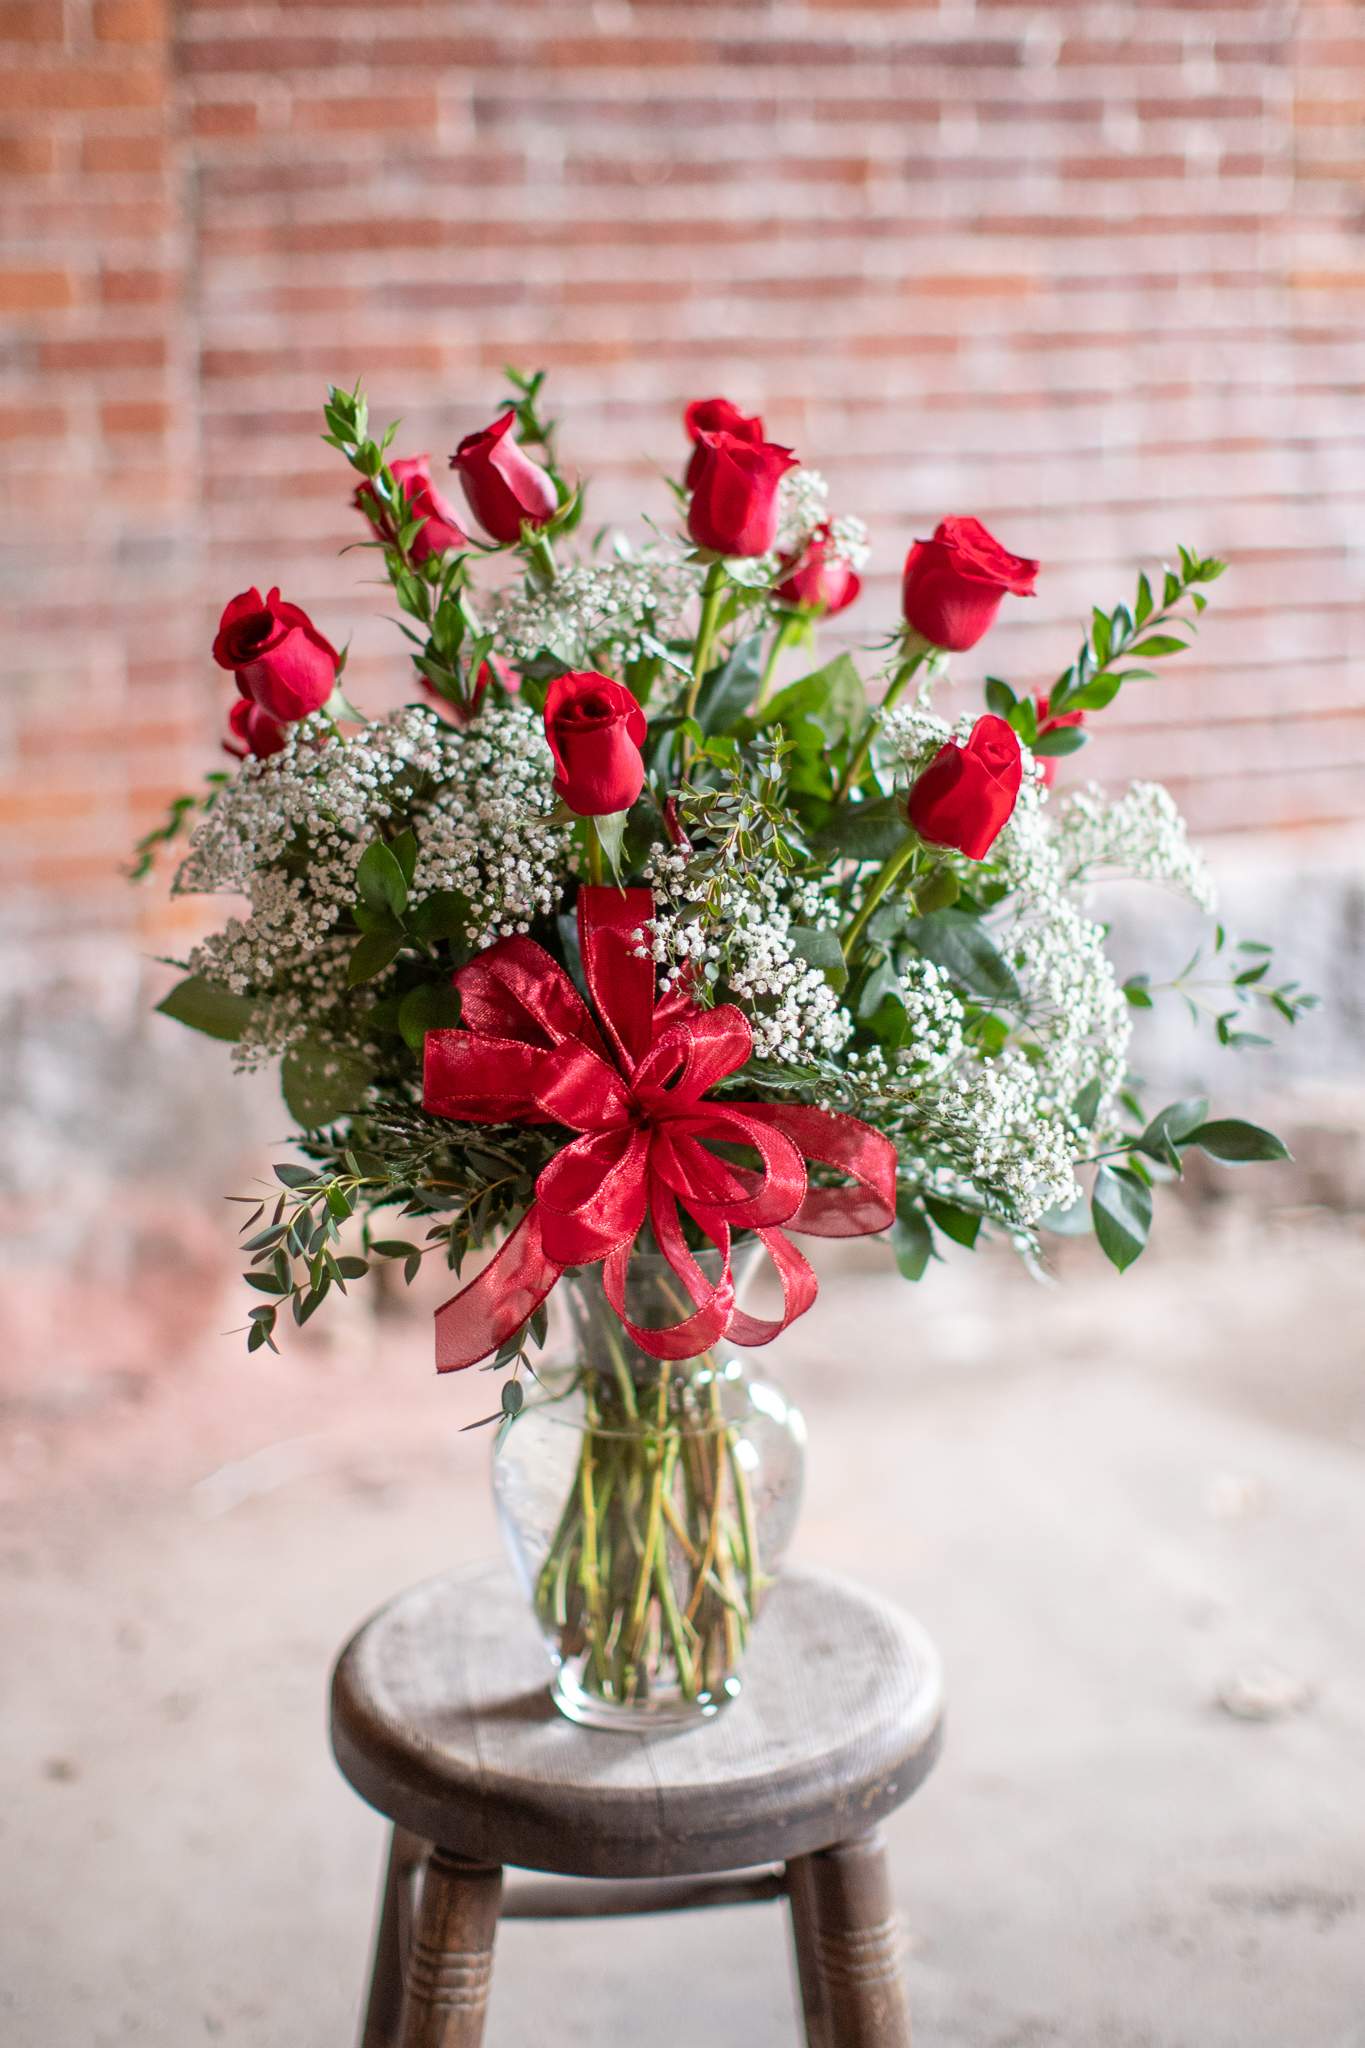 Timeless Crimson Dozen - A timeless classic. Traditionally designed premium AAA grade extra long stem red roses in a beautiful crystal clear gathering vase. Accent flowers and greenery vary by season. A grand showing of love and admiration to any recipient. Approximately 24-36 inches tall by 20-24 inches at widest point.